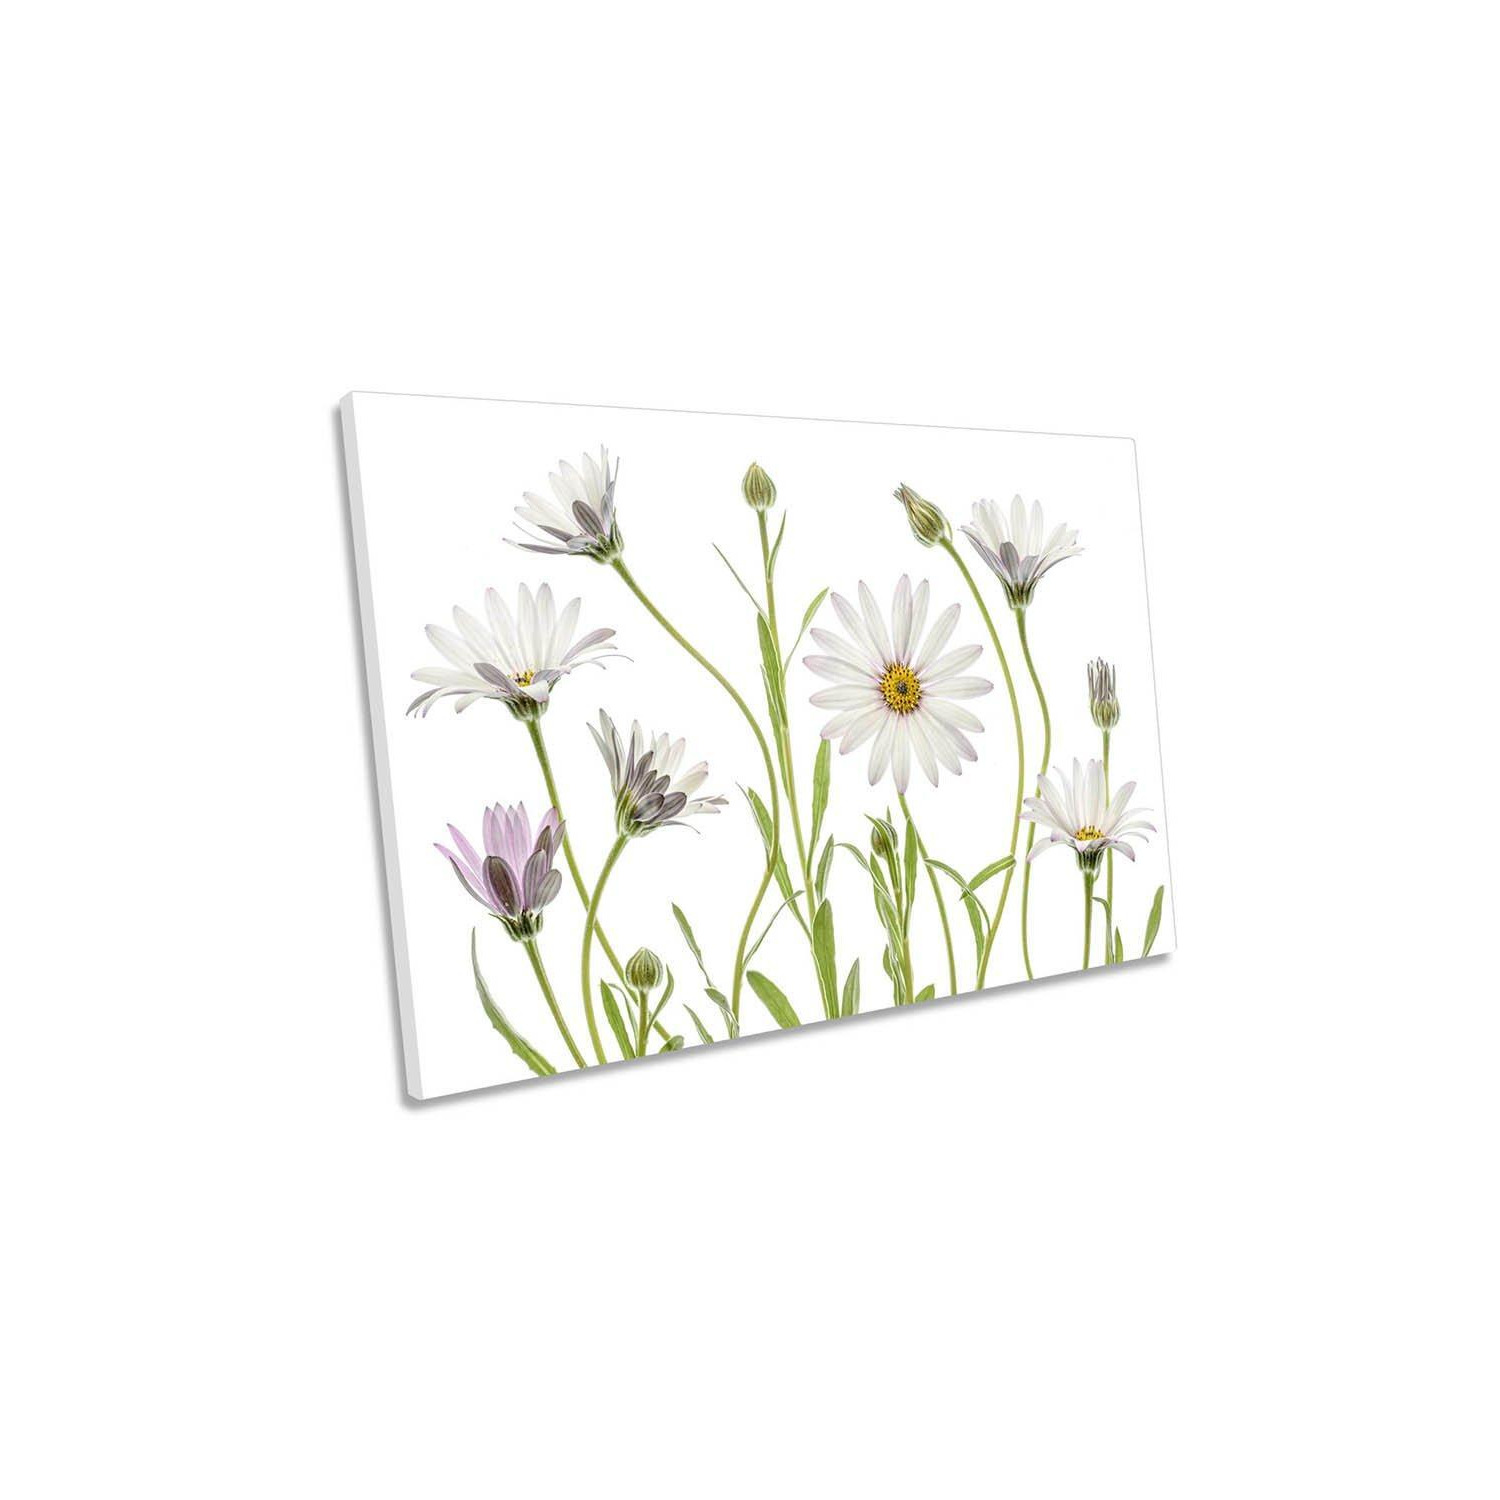 Cape Daisy Flowers Floral White Canvas Wall Art Picture Print - image 1